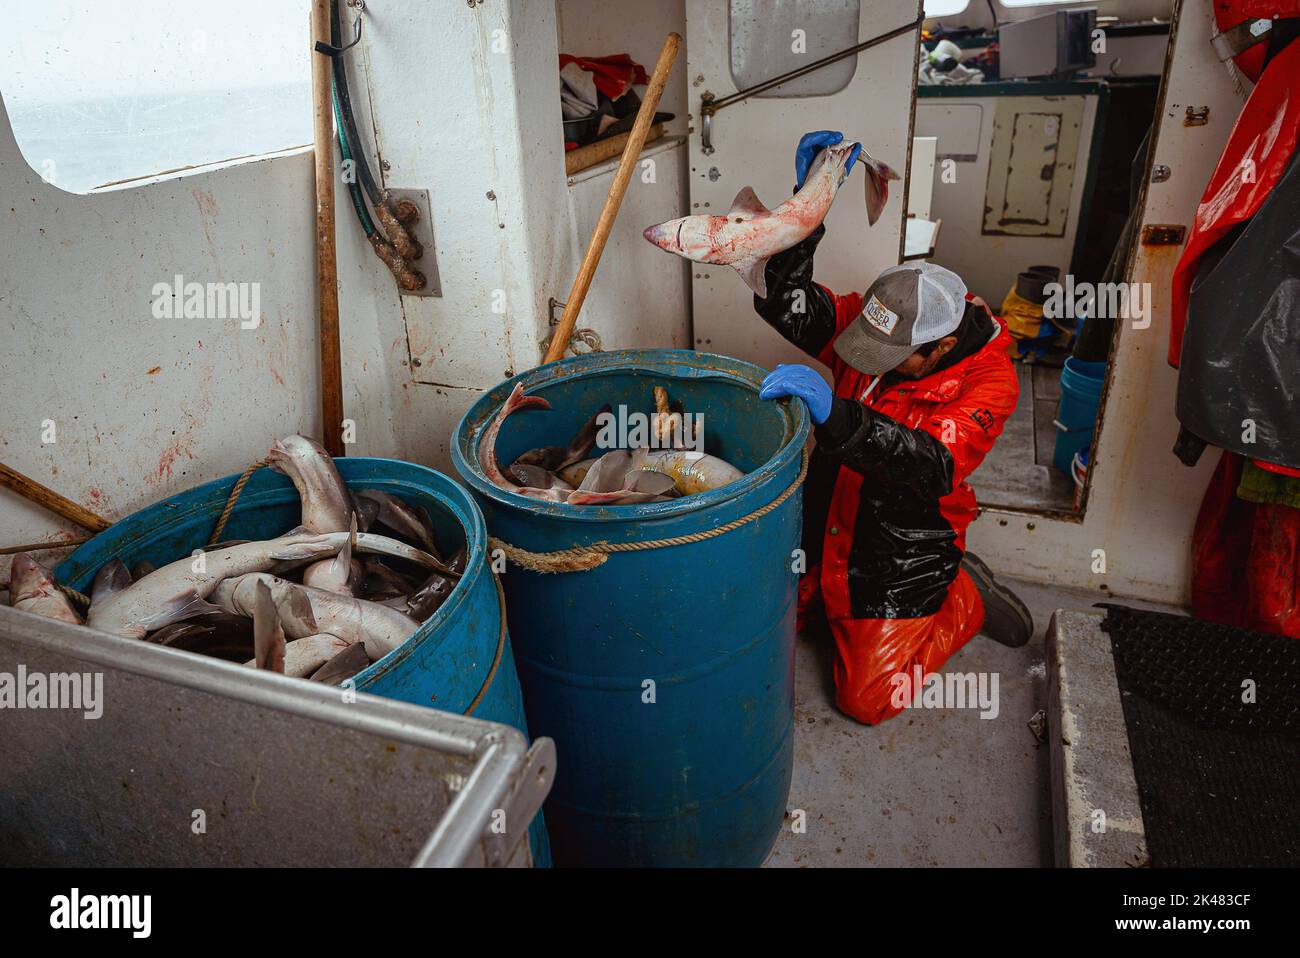 Portland, Maine, USA. 27th Sep, 2022. A crew member aboard a commercial fishing boat throws a dogfish into a blue bucket, caught as bycatch off the coast of Maine. A board a gillnet fishing boat, crew haul their catch of monkfish, pollock, and cod from the early hours of the morning until late at night. The fishing industry in Maine has recently taken a blow with a new set of restrictions on fishing and the environmental organization Seafood Watch recommending for people to avoid eating American lobster. This listing and regulation pose fresh threats to fishers' livelihoods. Whil Stock Photo